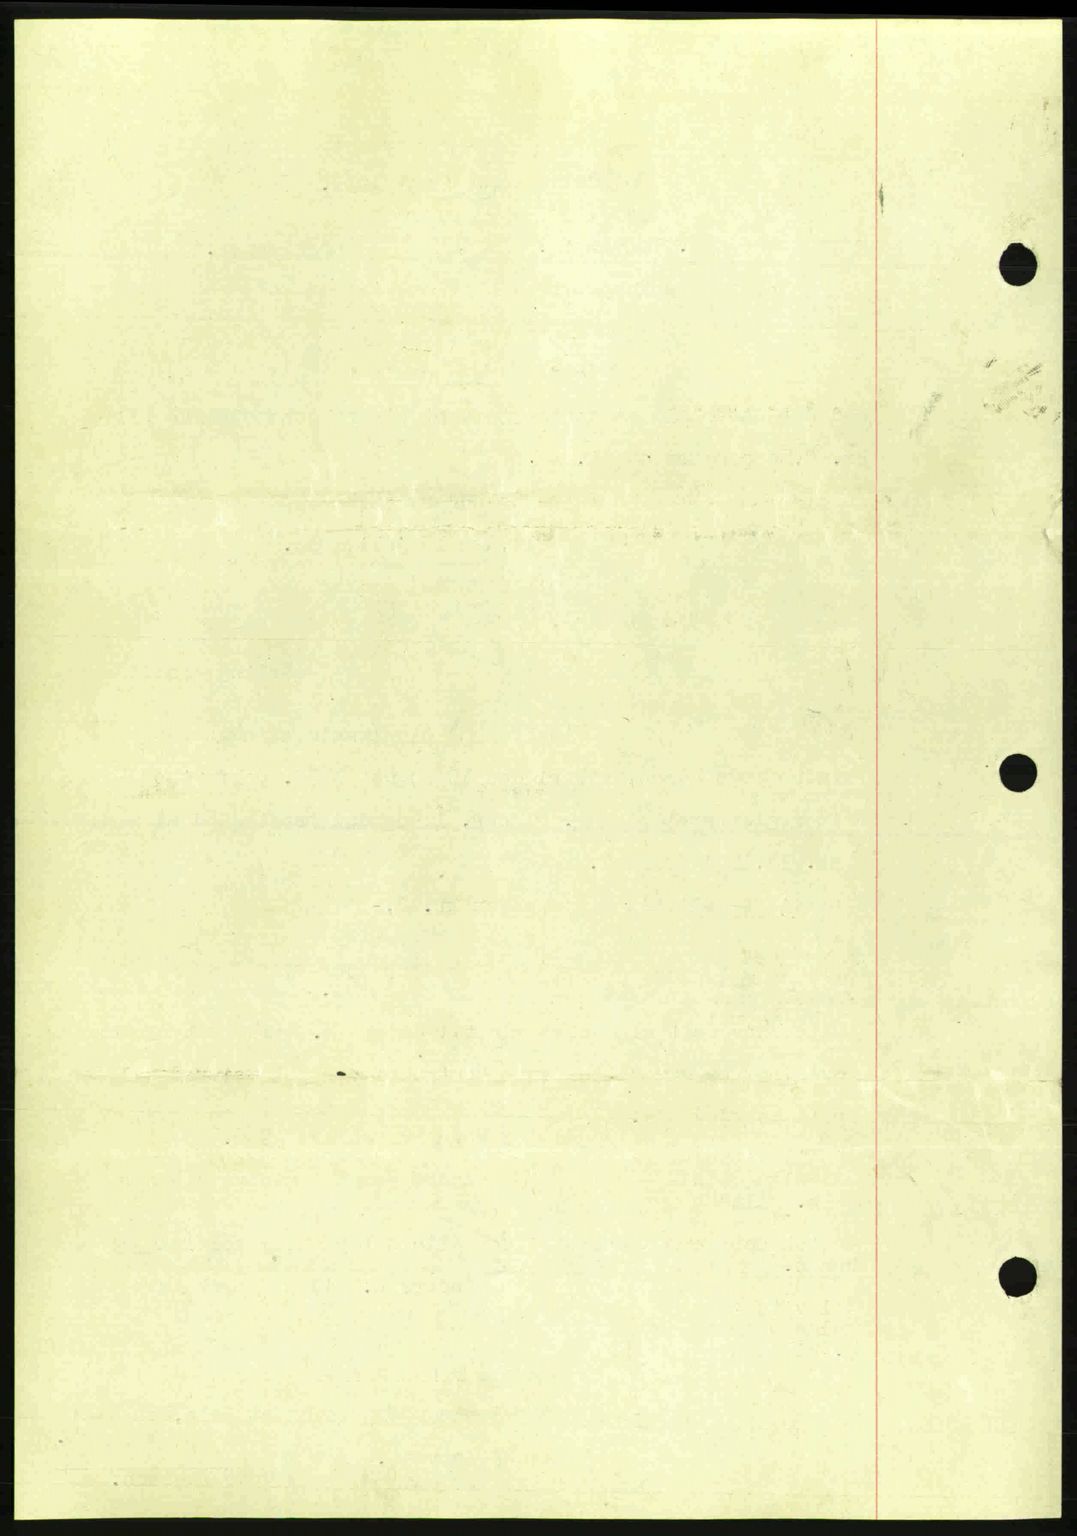 Indre Sogn tingrett, SAB/A-3301/1/G/Gb/Gba/L0030: Mortgage book no. 30, 1935-1937, Deed date: 08.06.1936